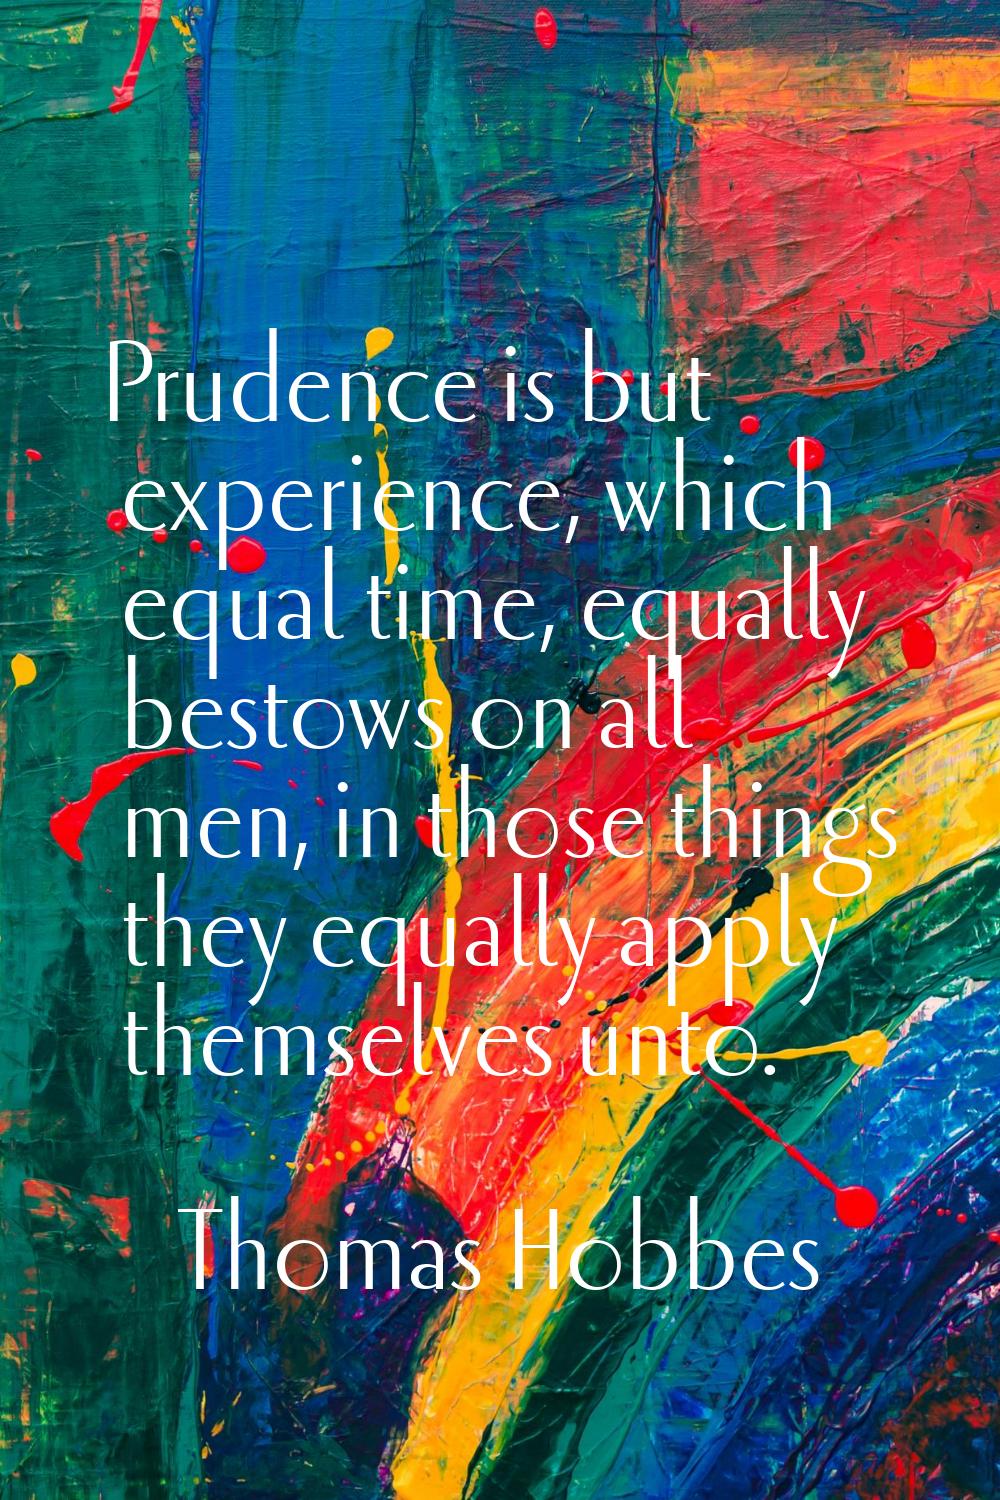 Prudence is but experience, which equal time, equally bestows on all men, in those things they equa